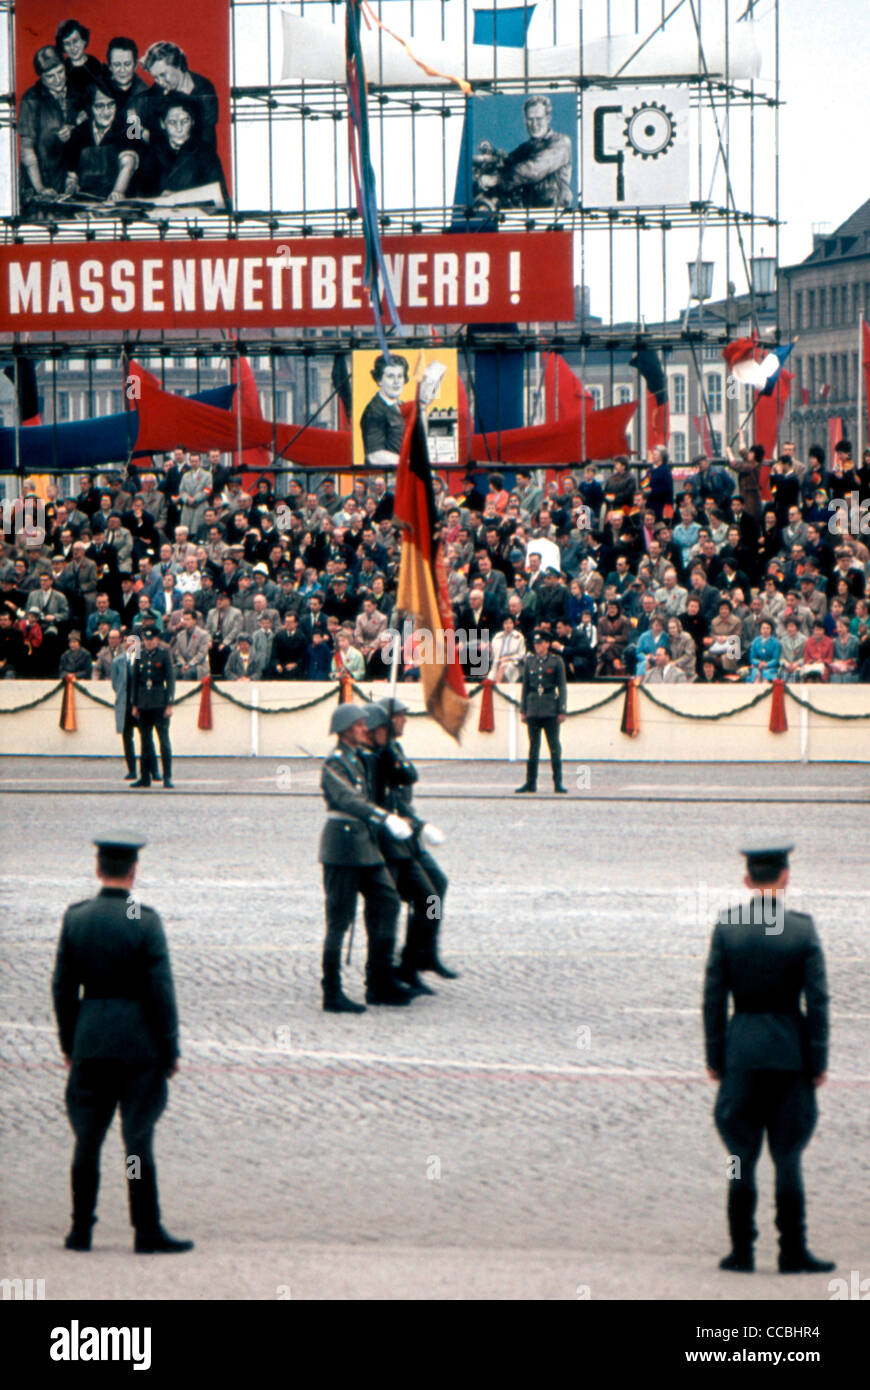 Military parade of the National People's Army NVA of the GDR 1960 in East Berlin. Stock Photo